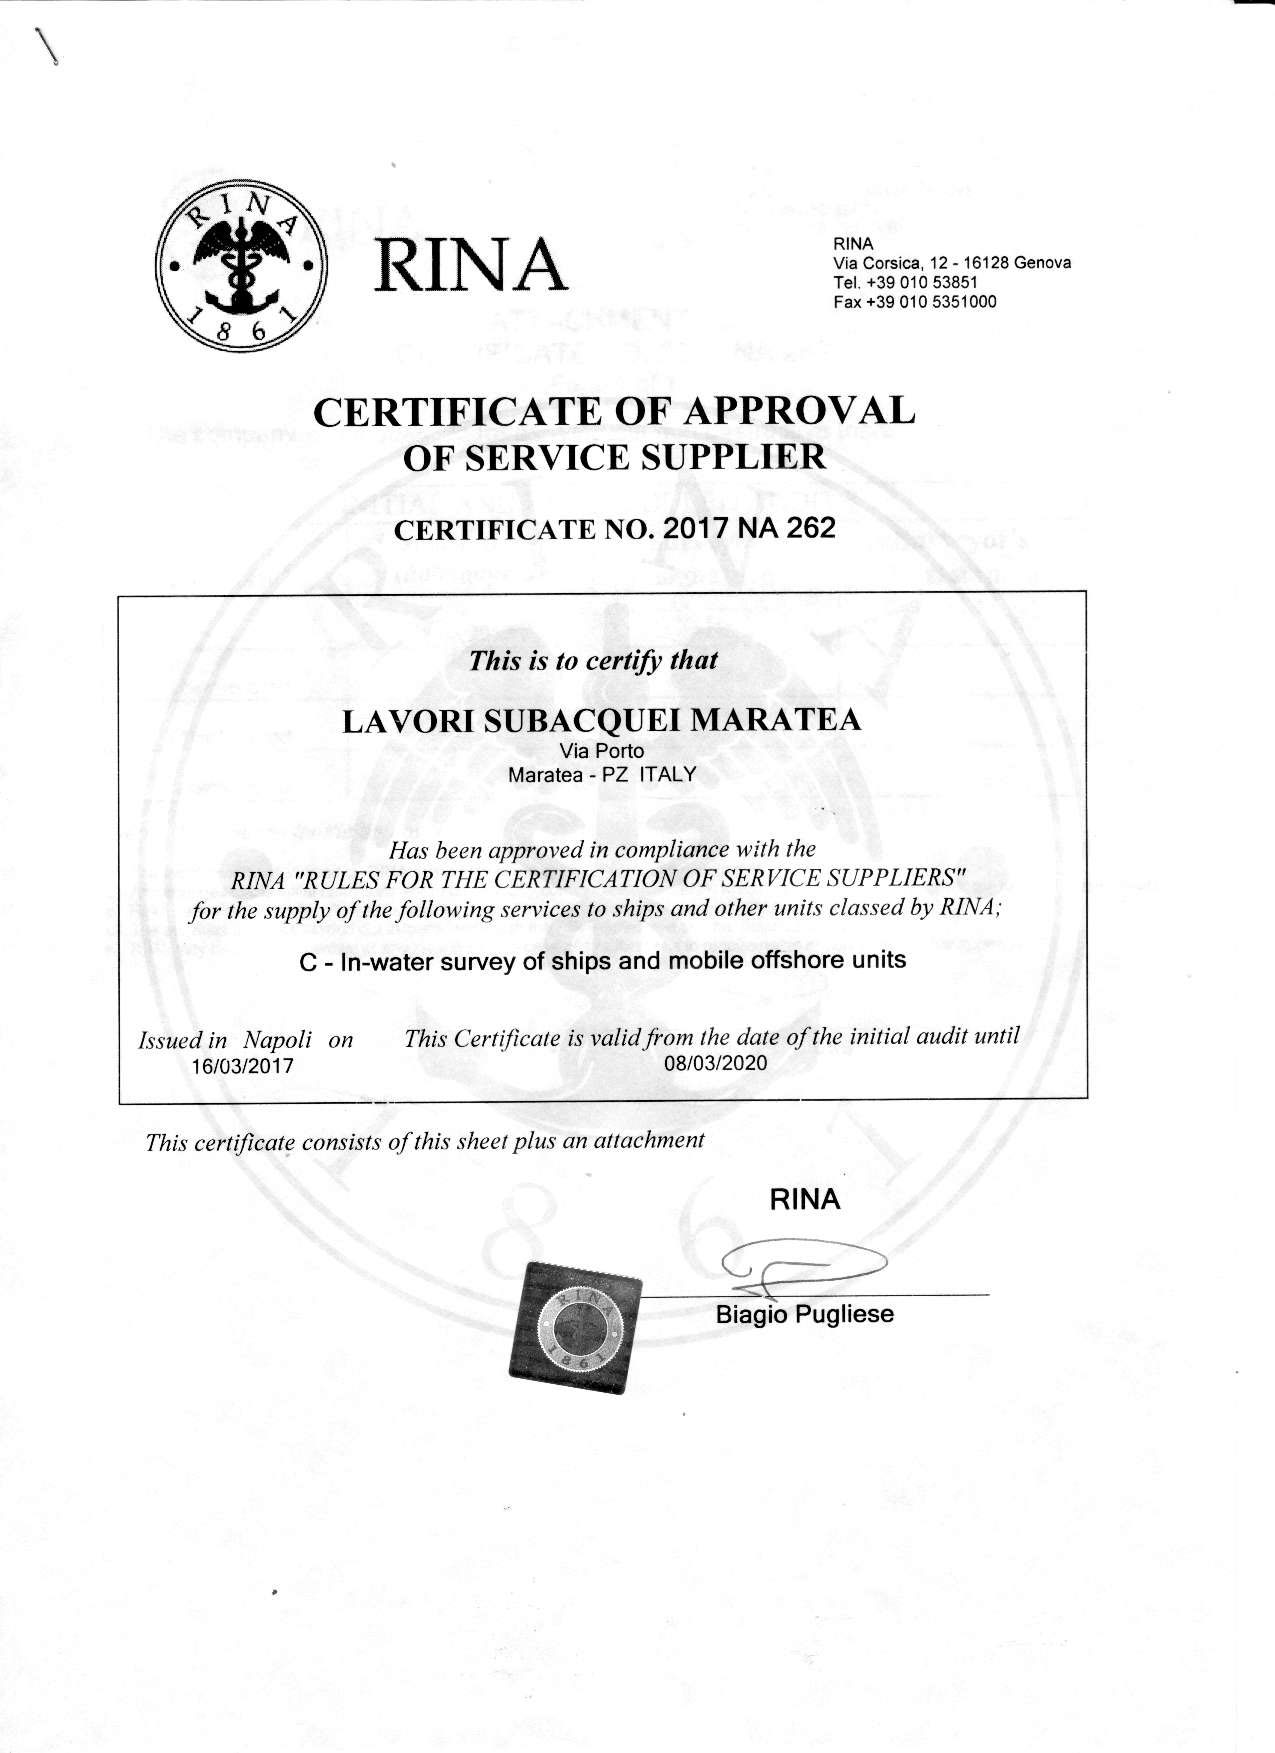 SERVICE SUPPLIER R.I.N.A page1